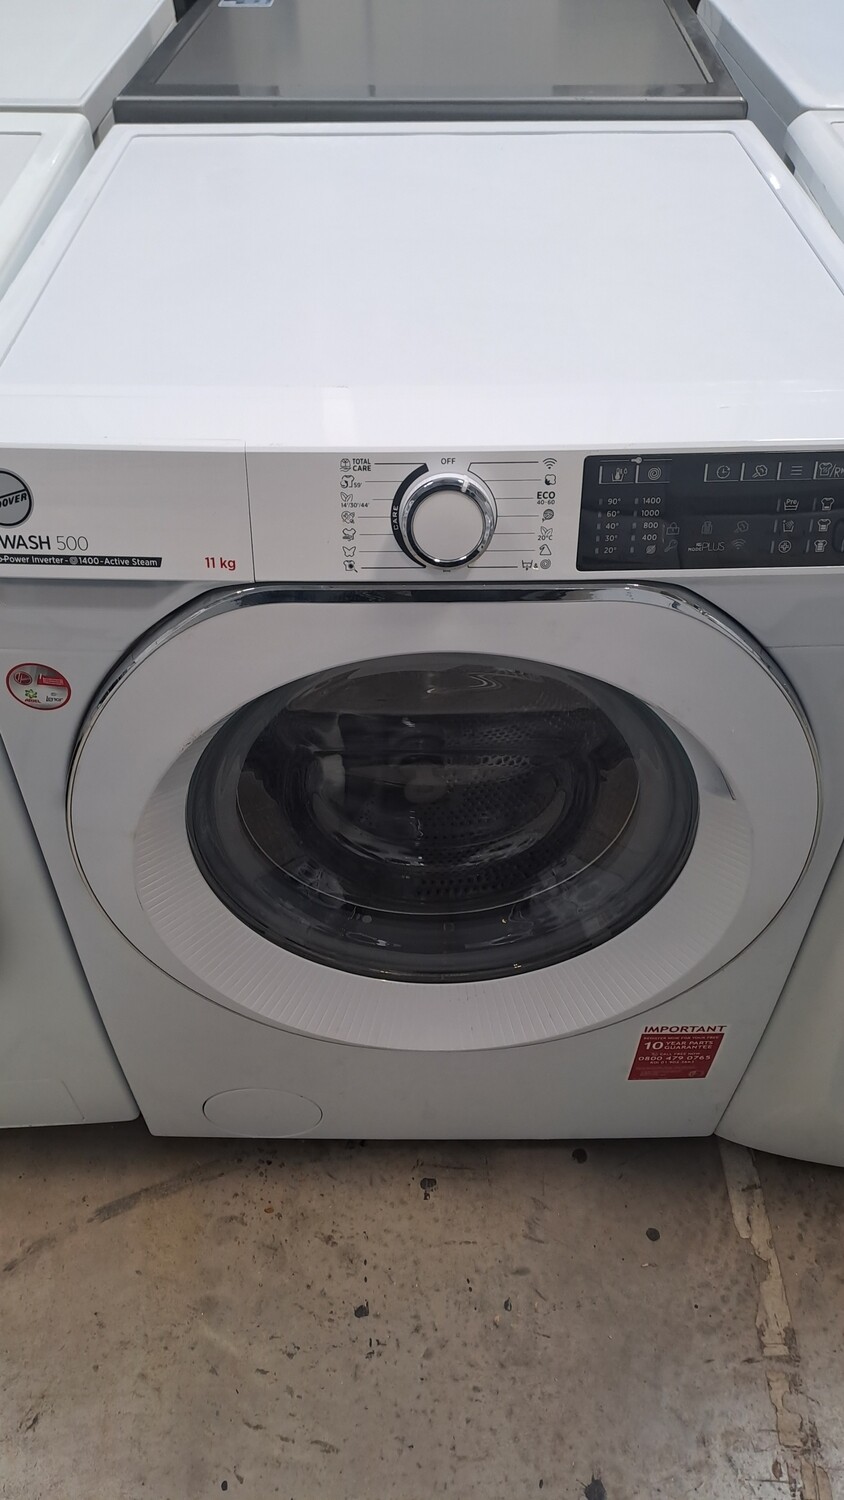 Hoover 11kg Load 1400 Spin Washing Machine White In Whitby Road Shop